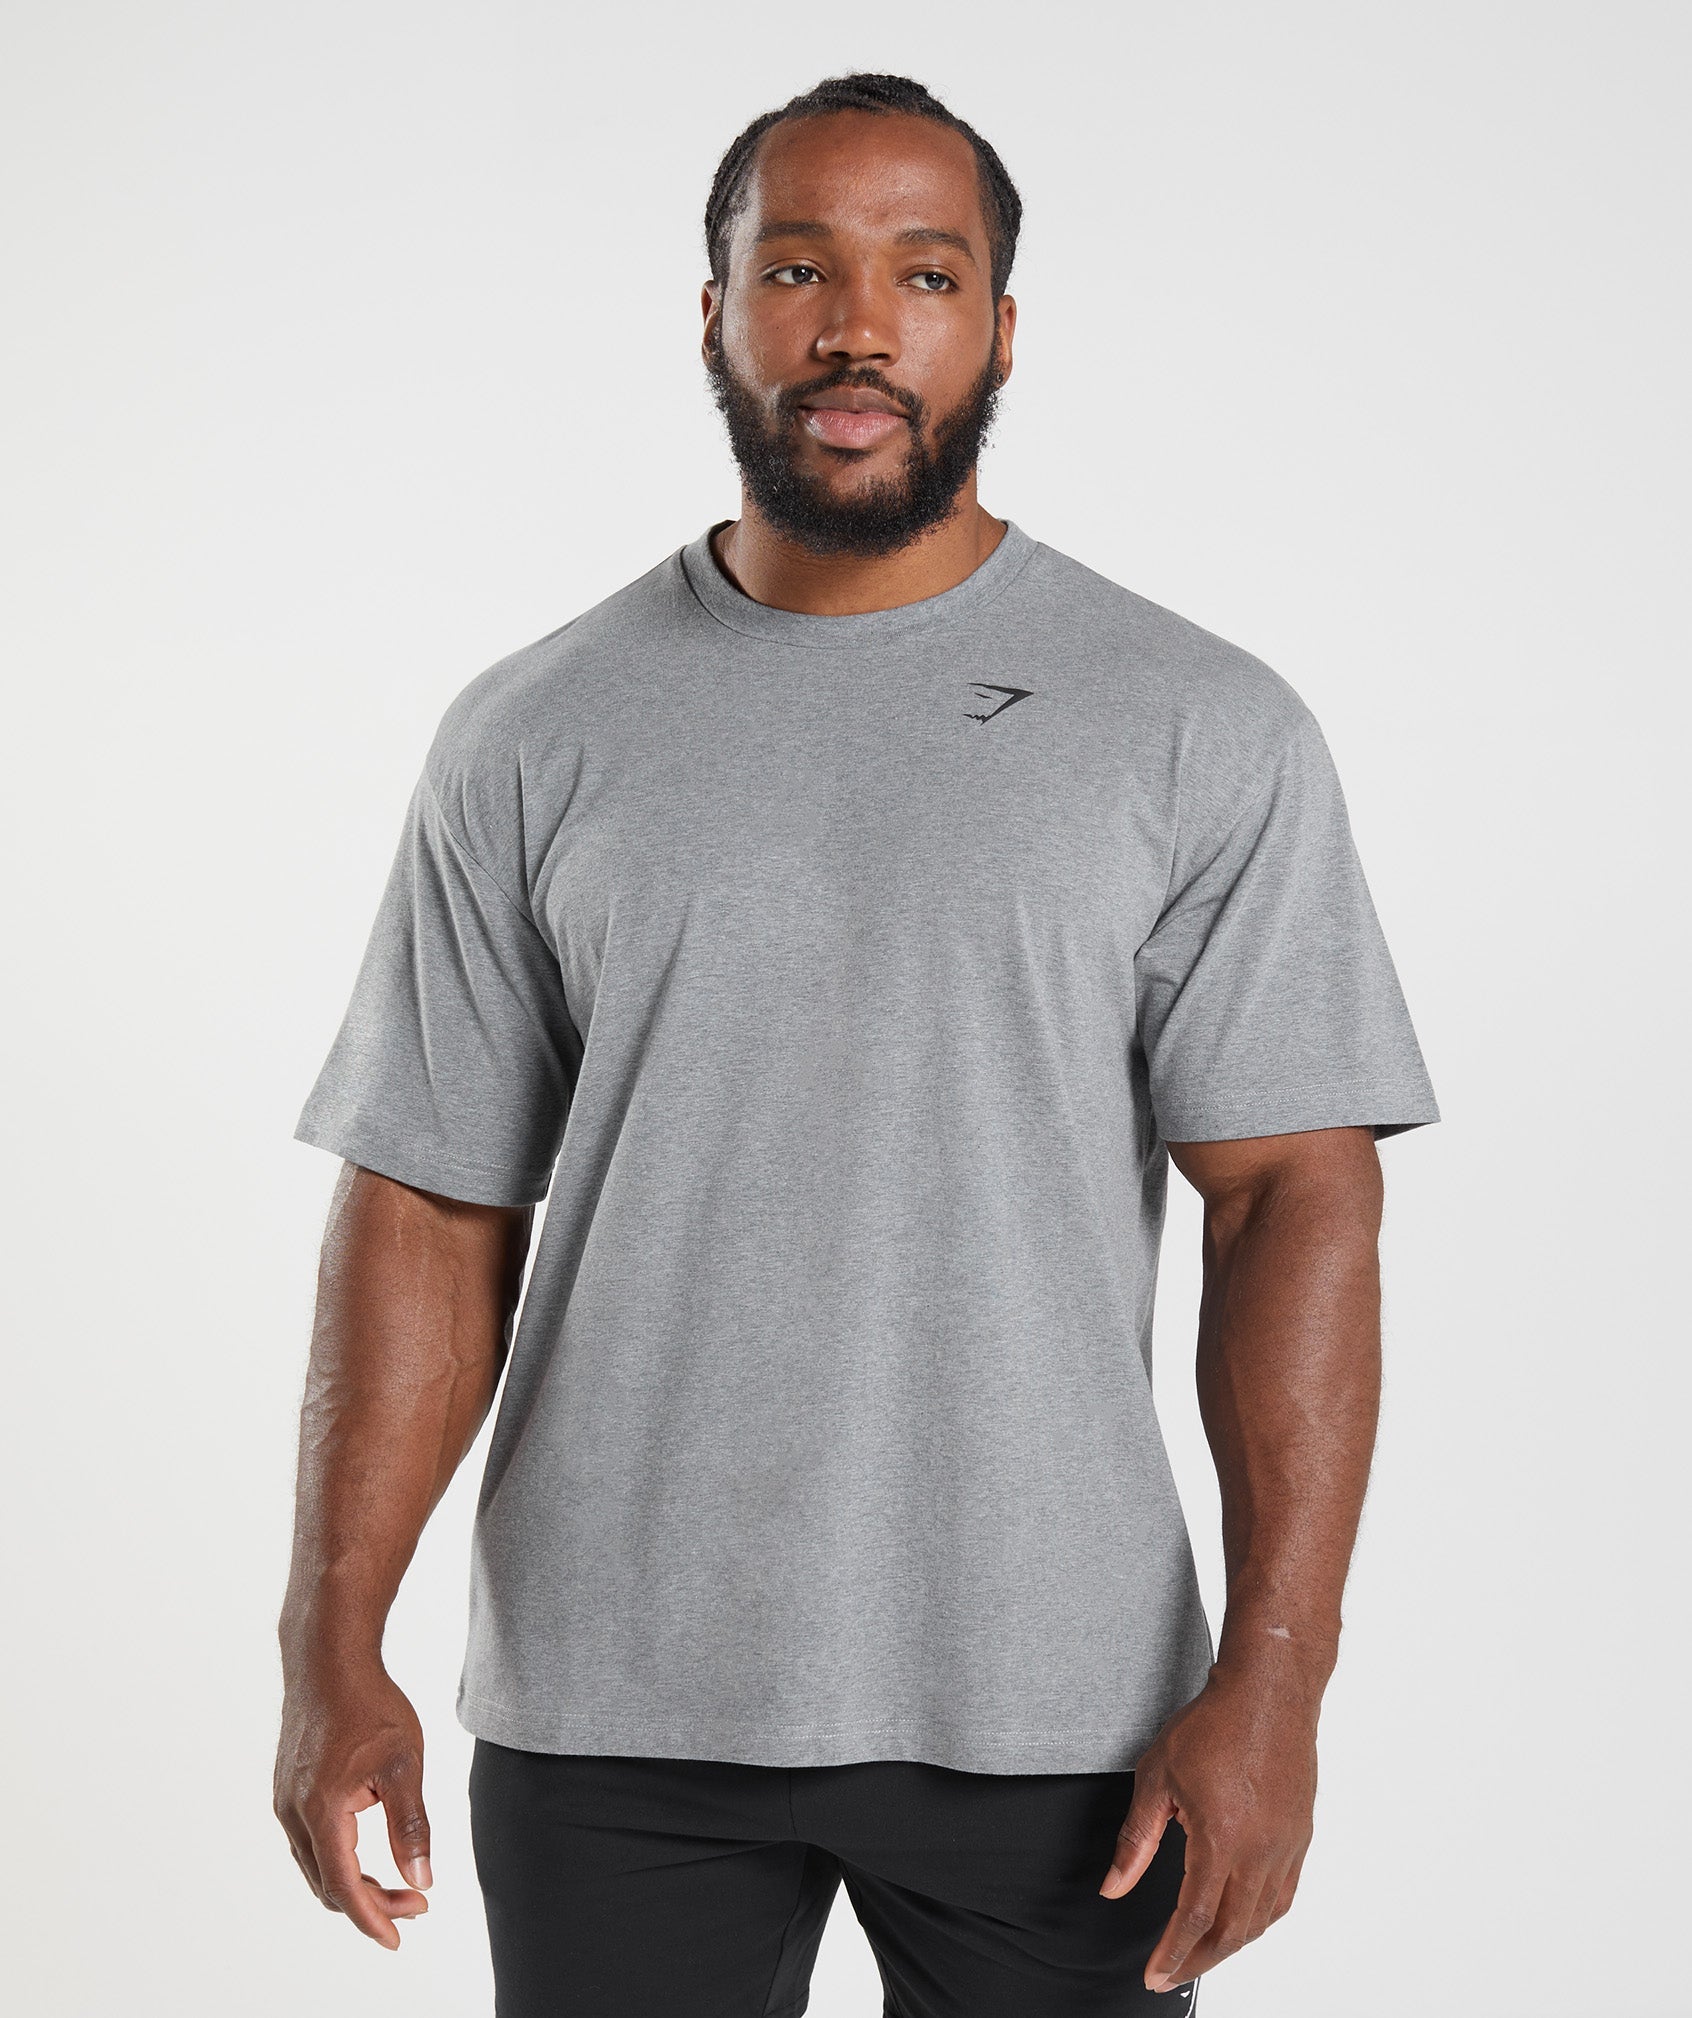 Essential Oversized T-Shirt in Charcoal Marl - view 1